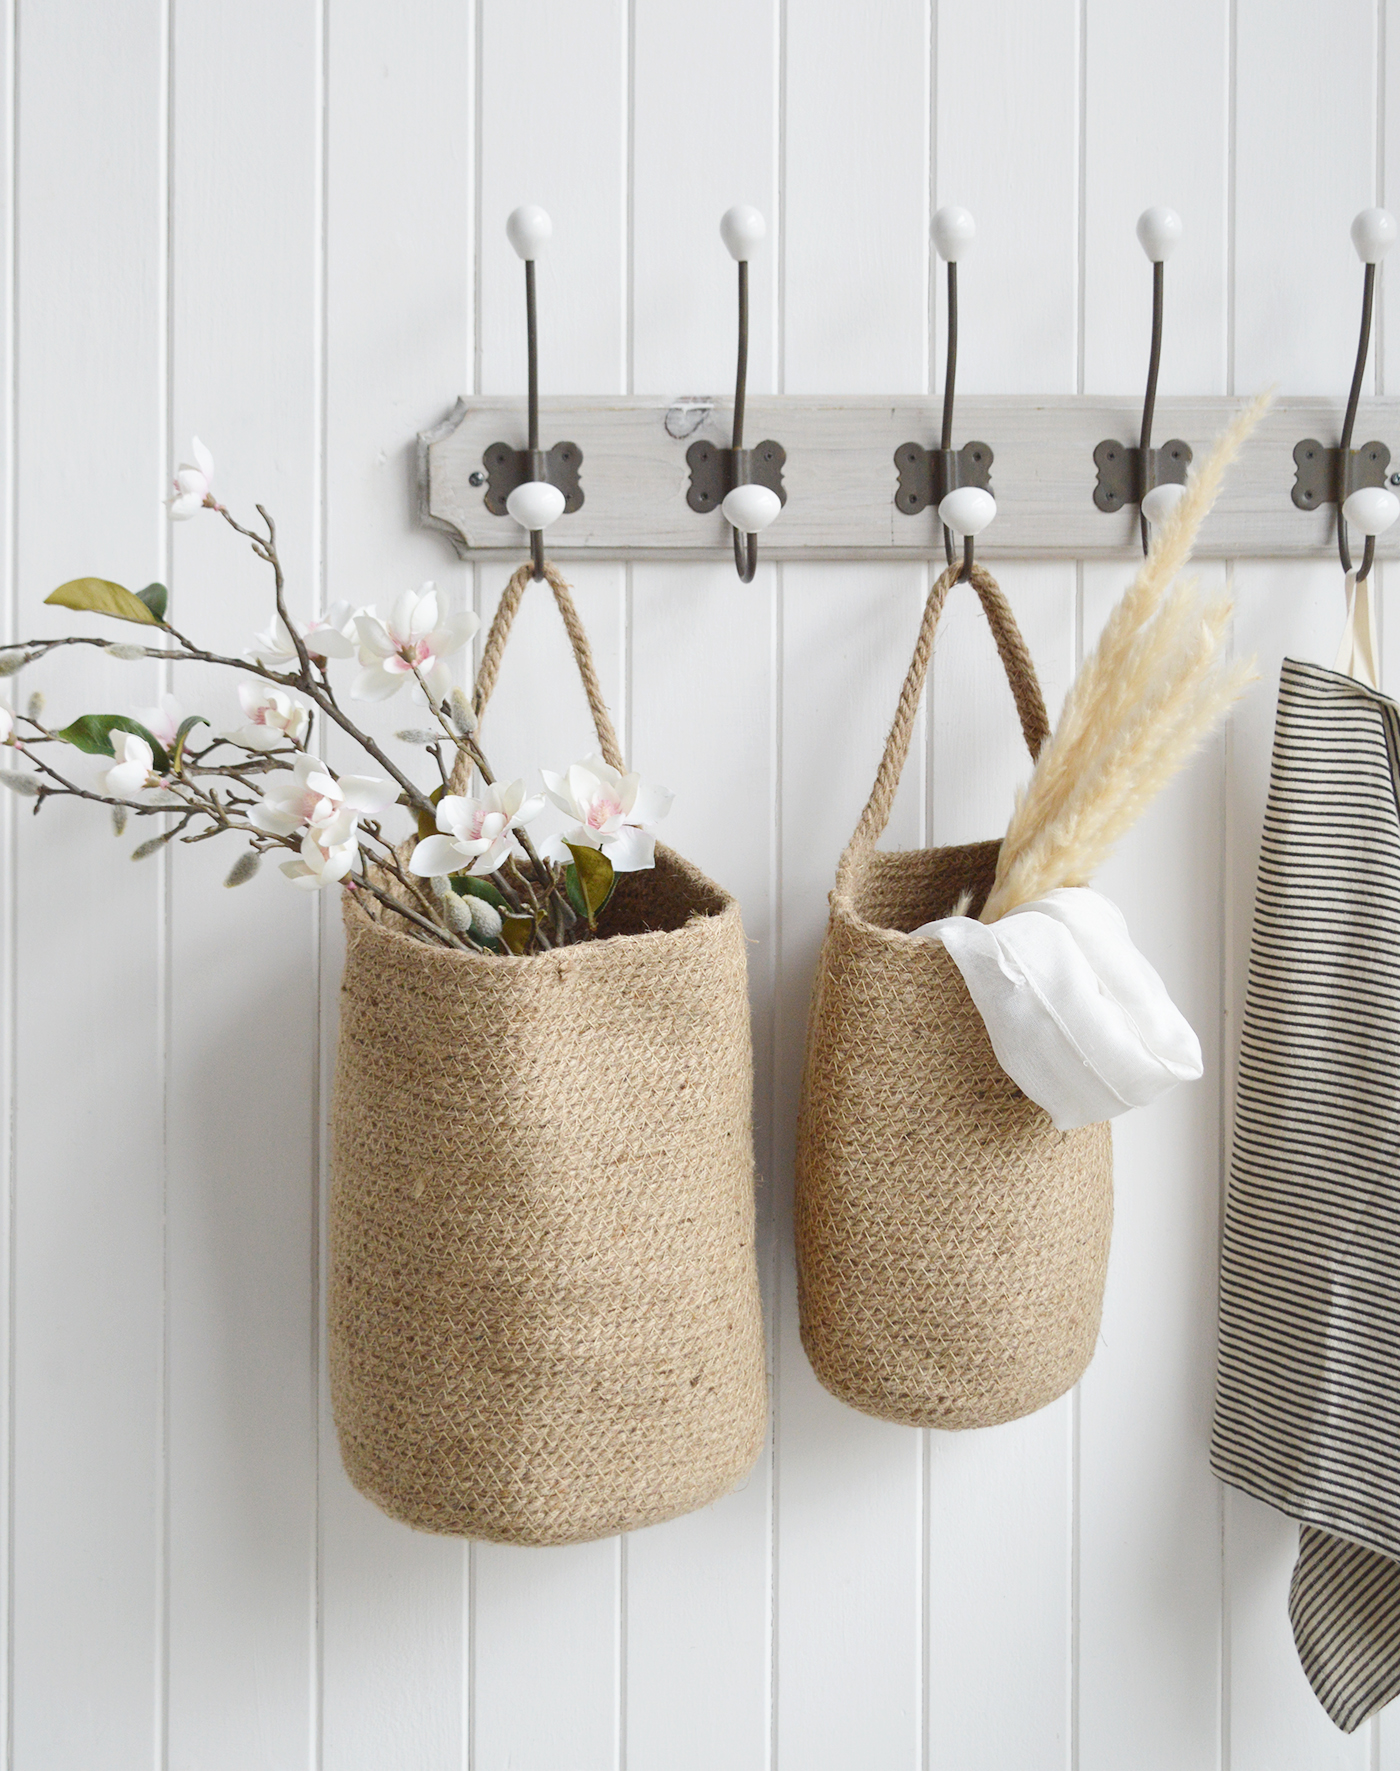 Campton Rustic set of hanging jute Basket - New England modern country, coastal and farmhouse furniture and interiors